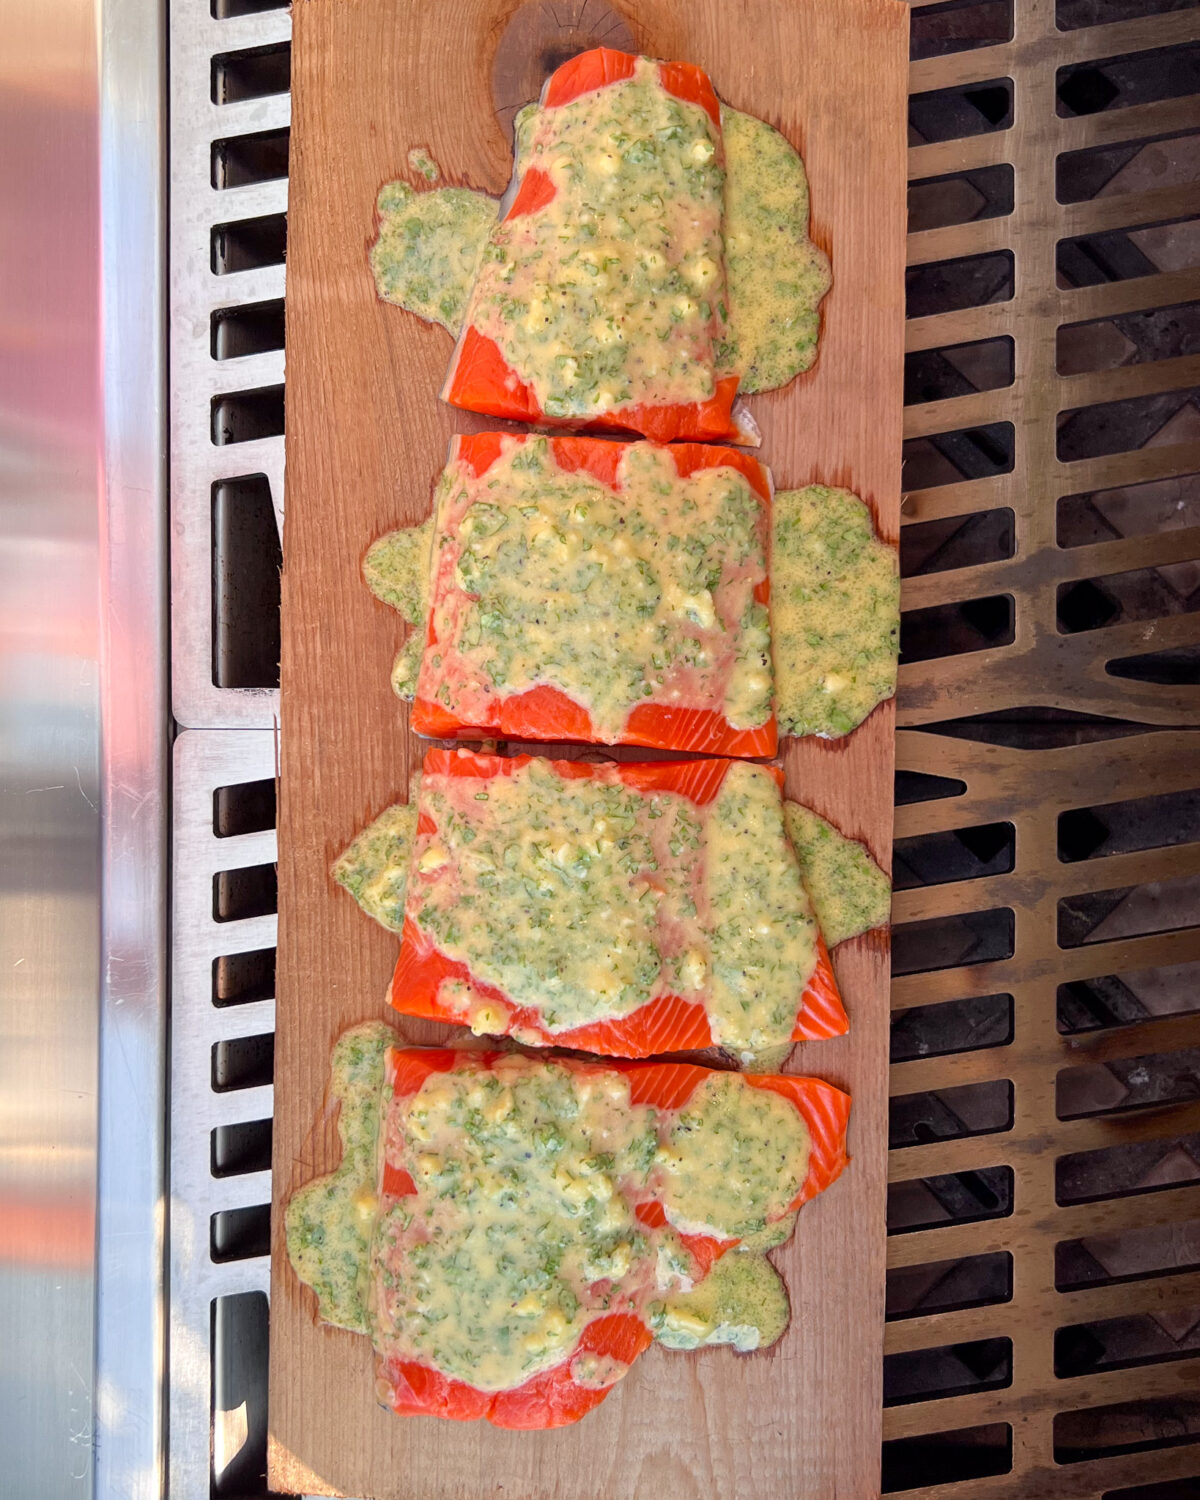 Four salmon portions on a cedar plank with sauce ready to grill.